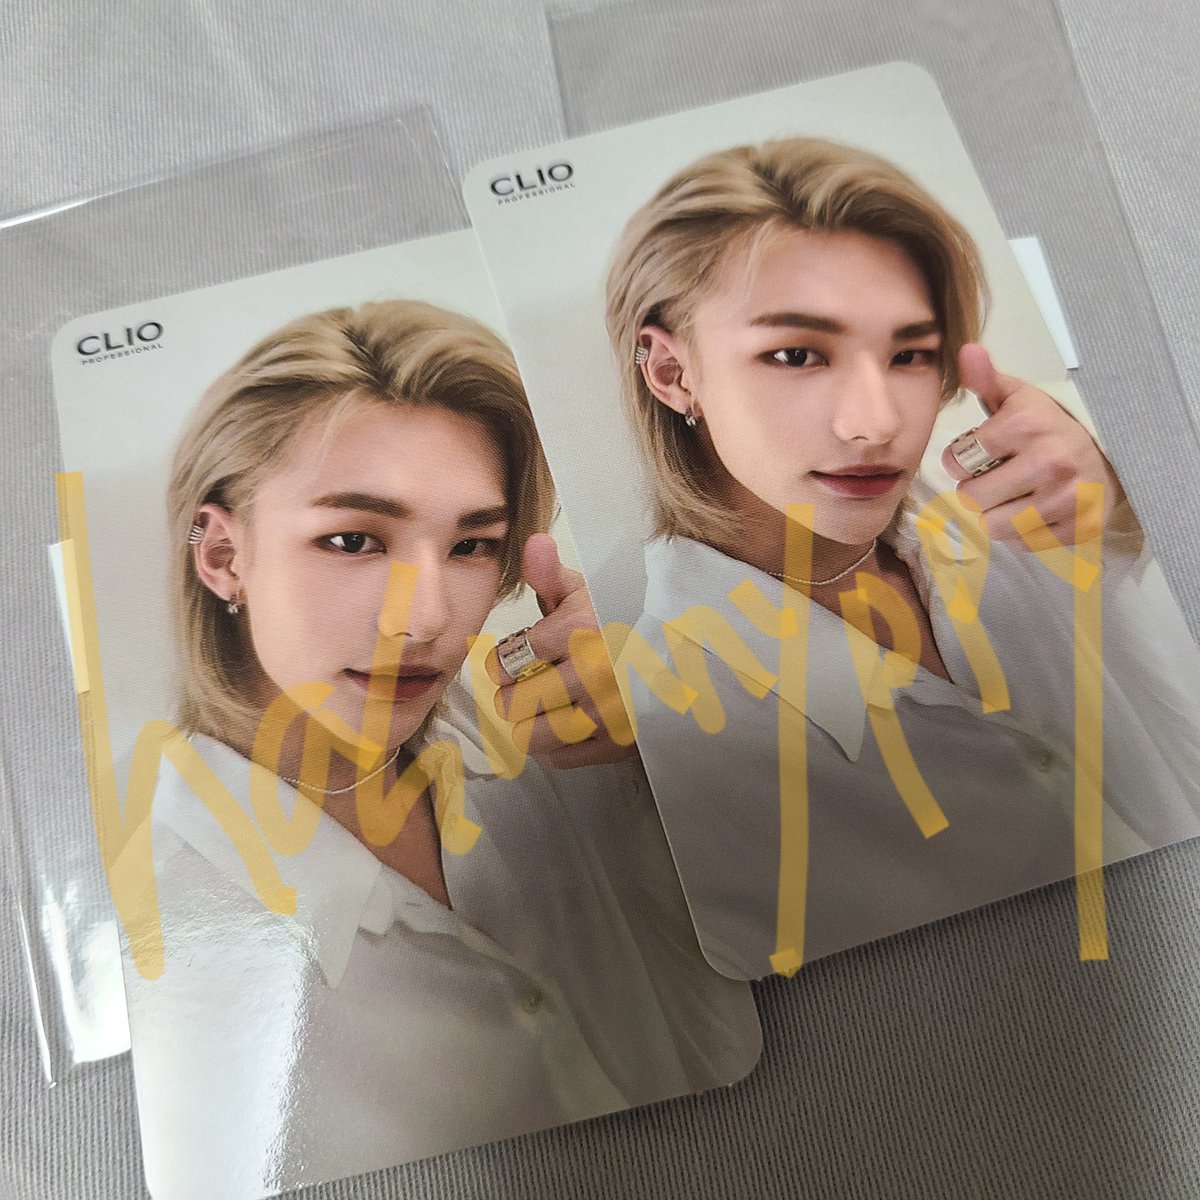 i would mürder for this pc